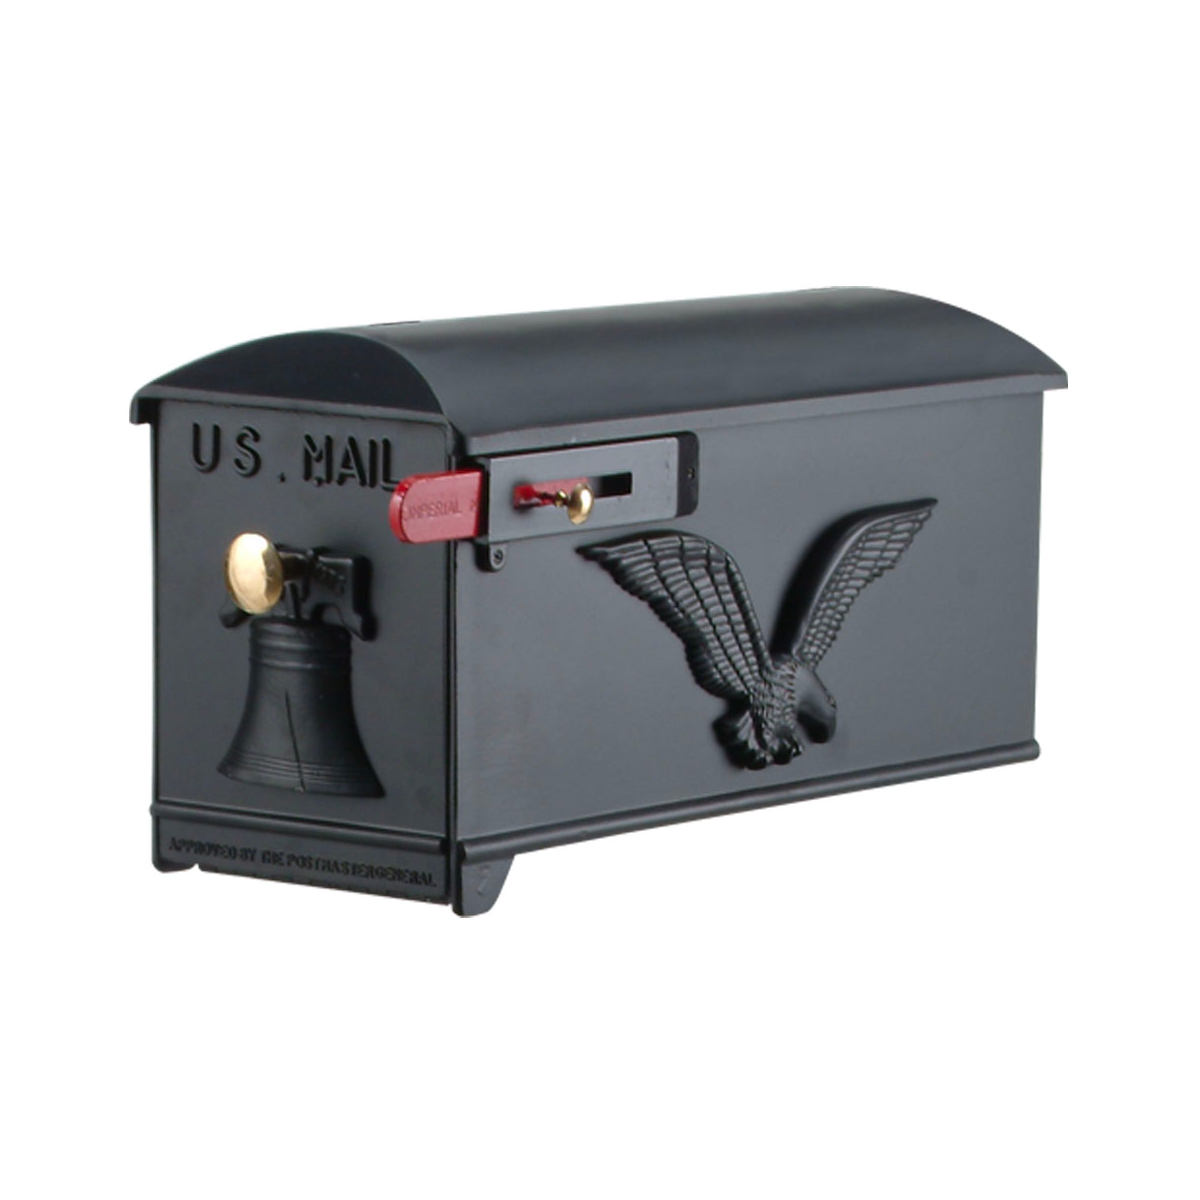 Imperial Mailbox 4 – Large Estate Box (mailbox only) Product Image